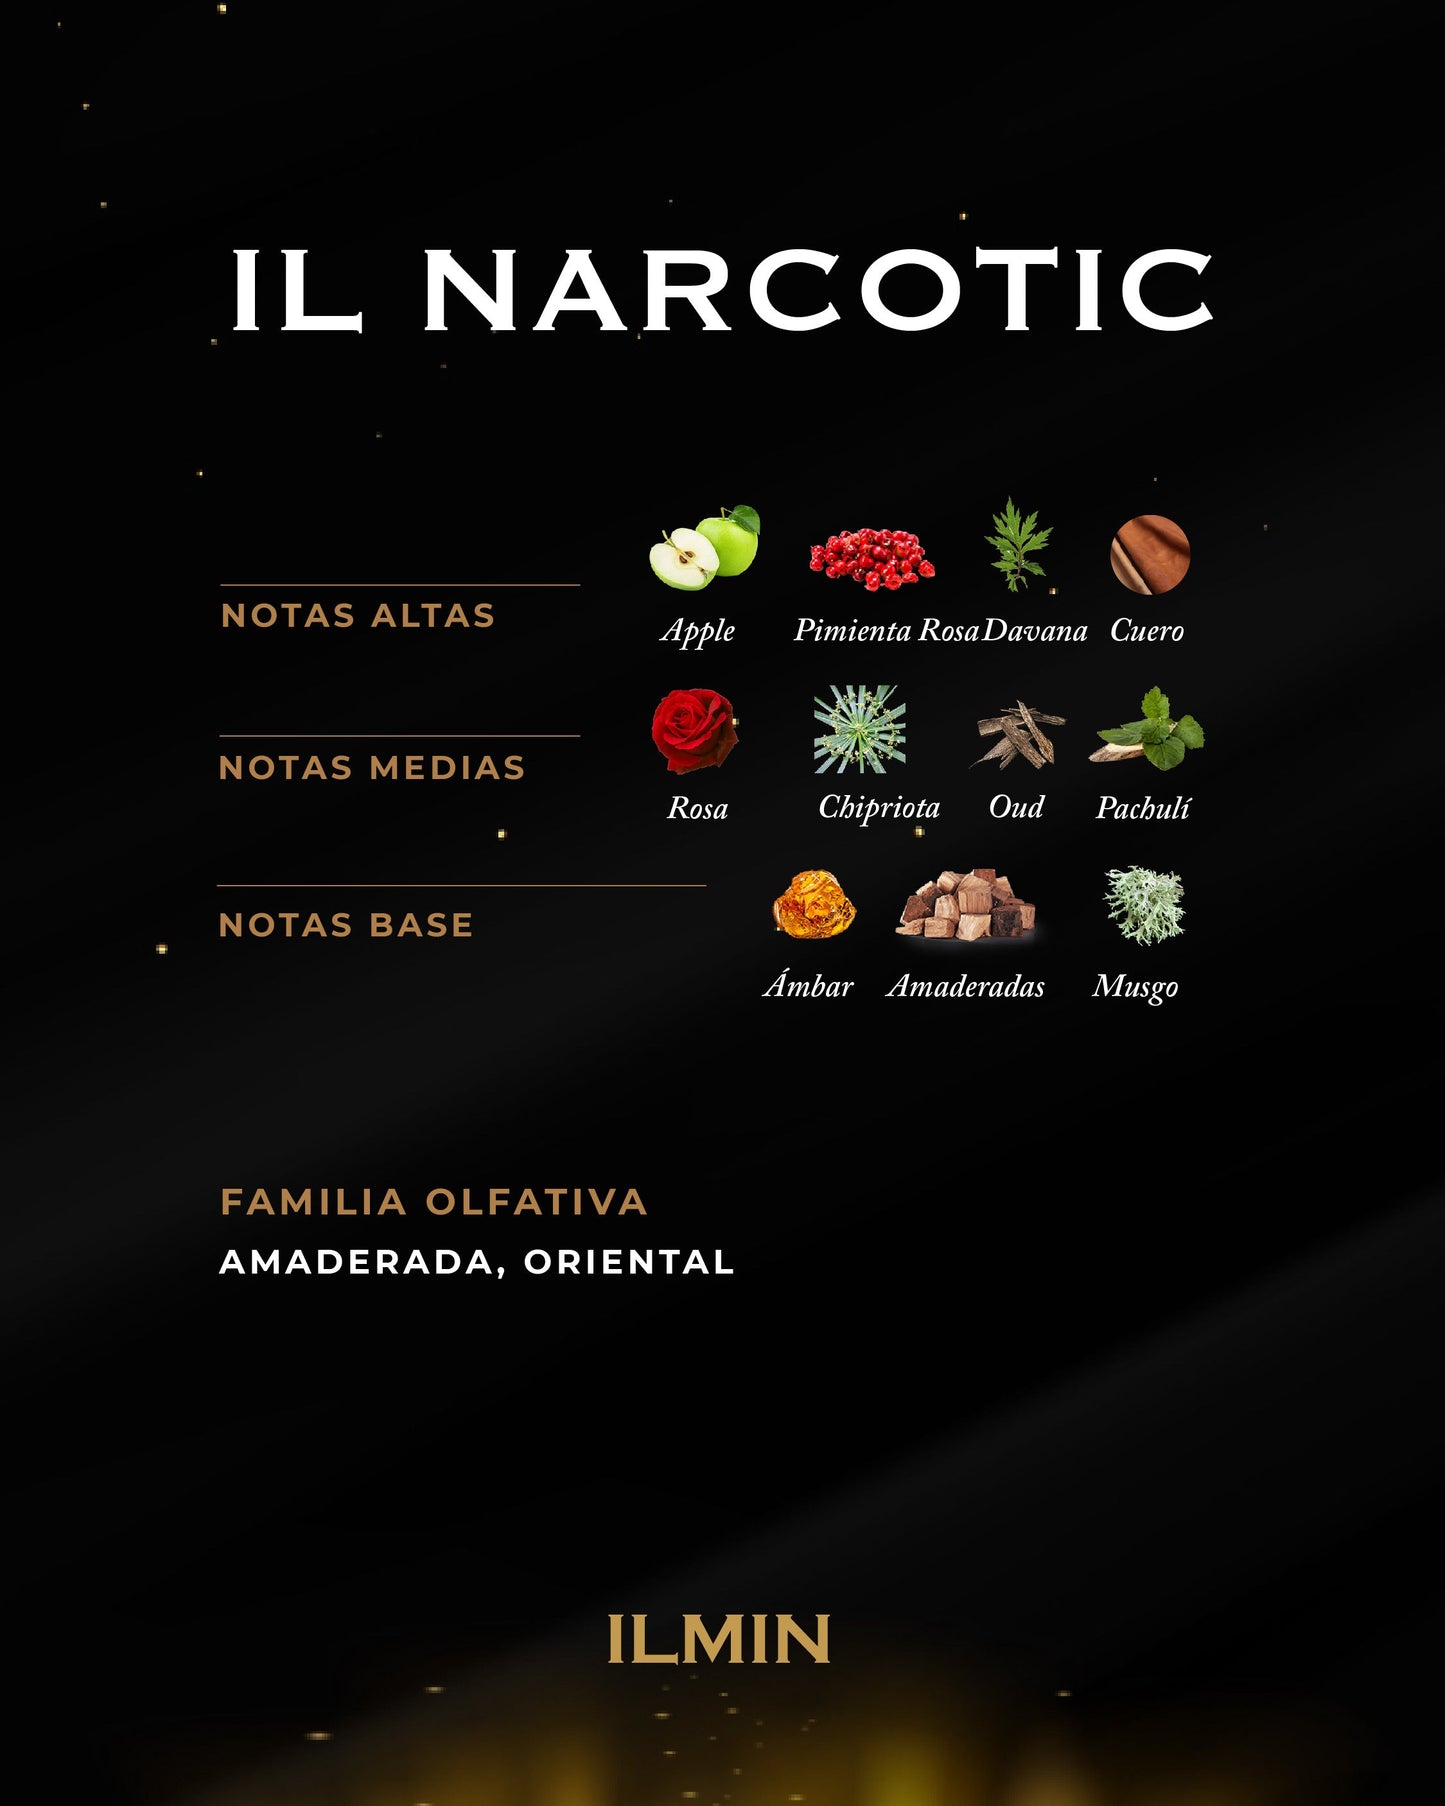 IL NARCOTIC